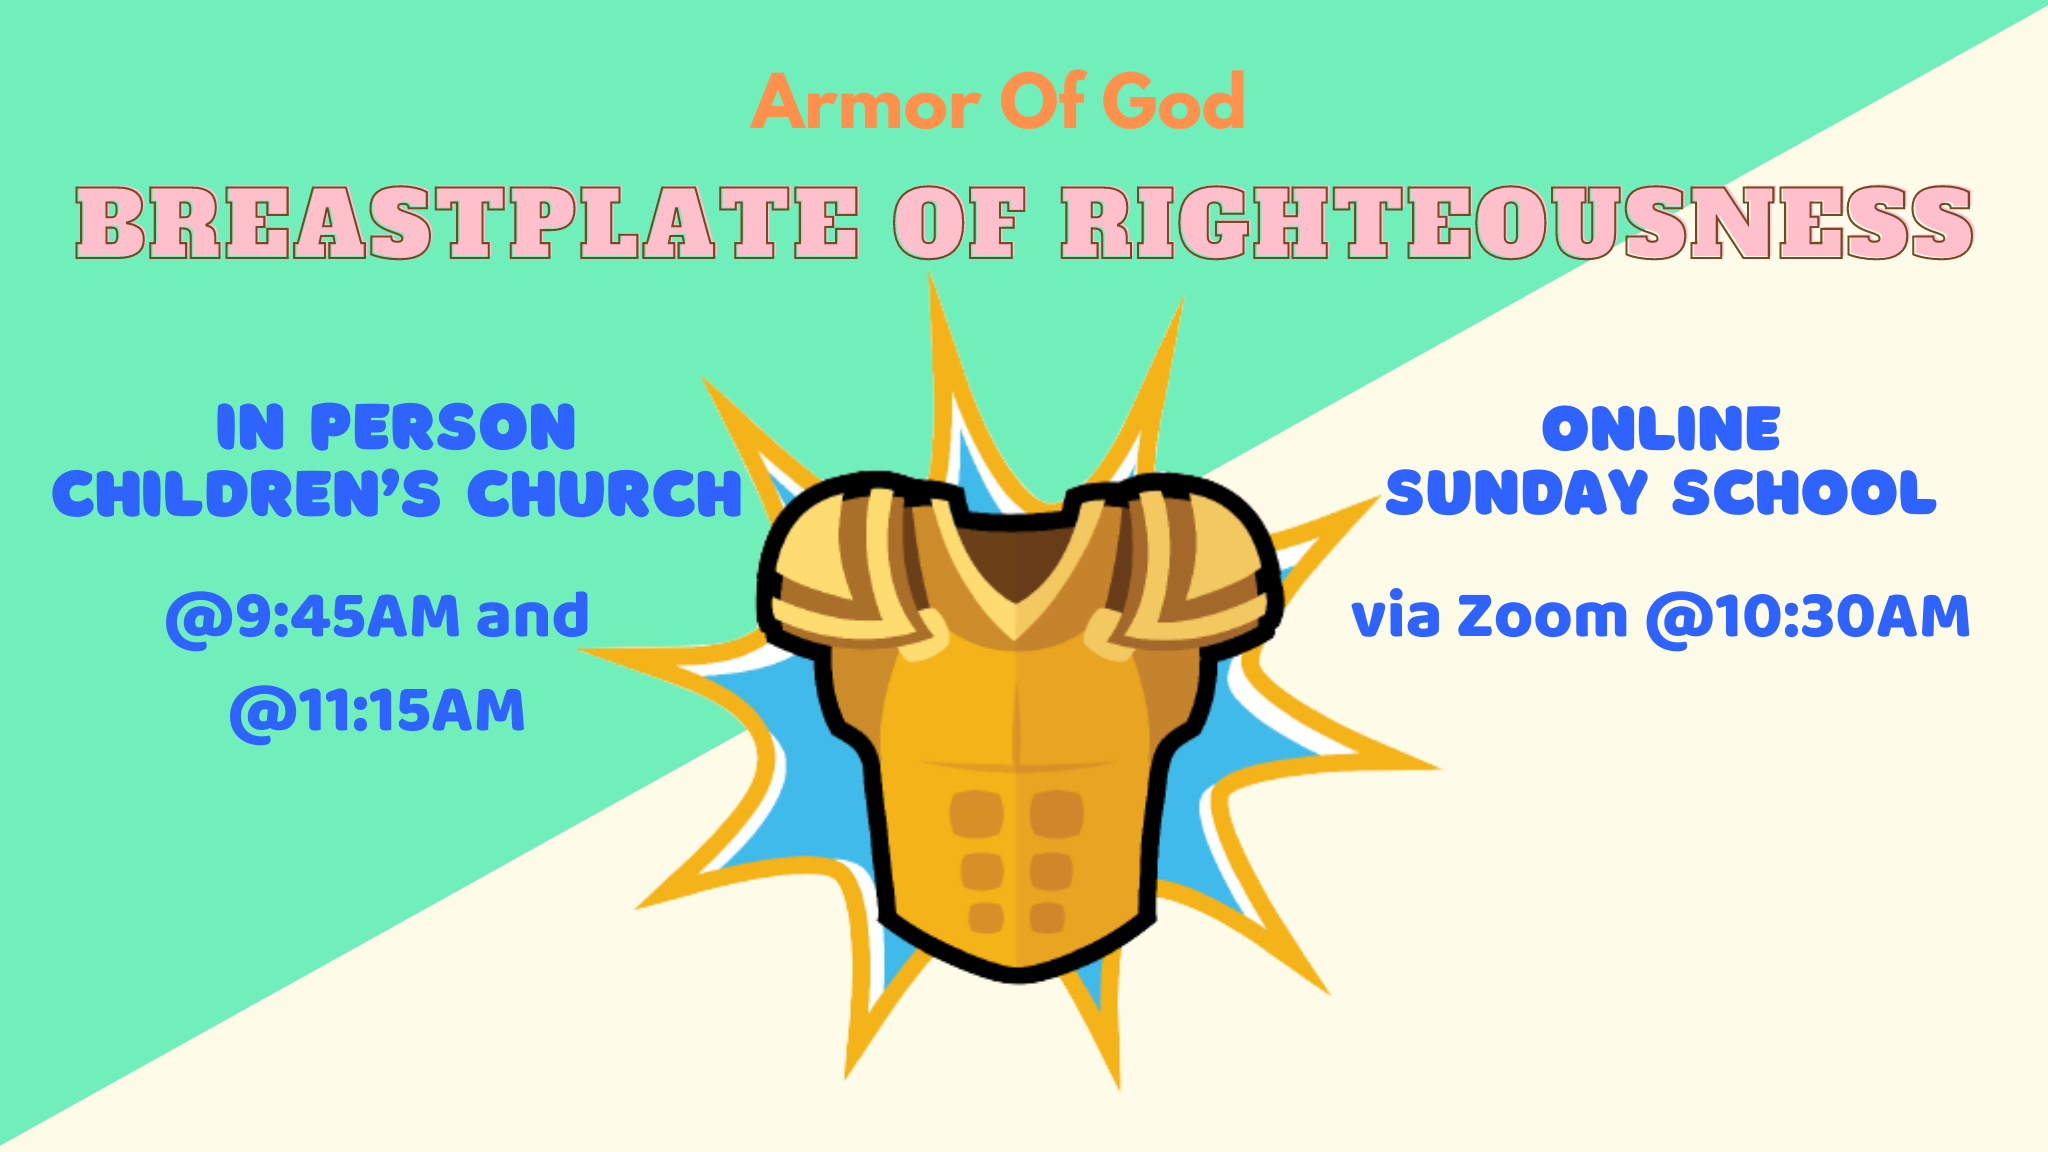 Sunday School - Breastplate of Righteousness